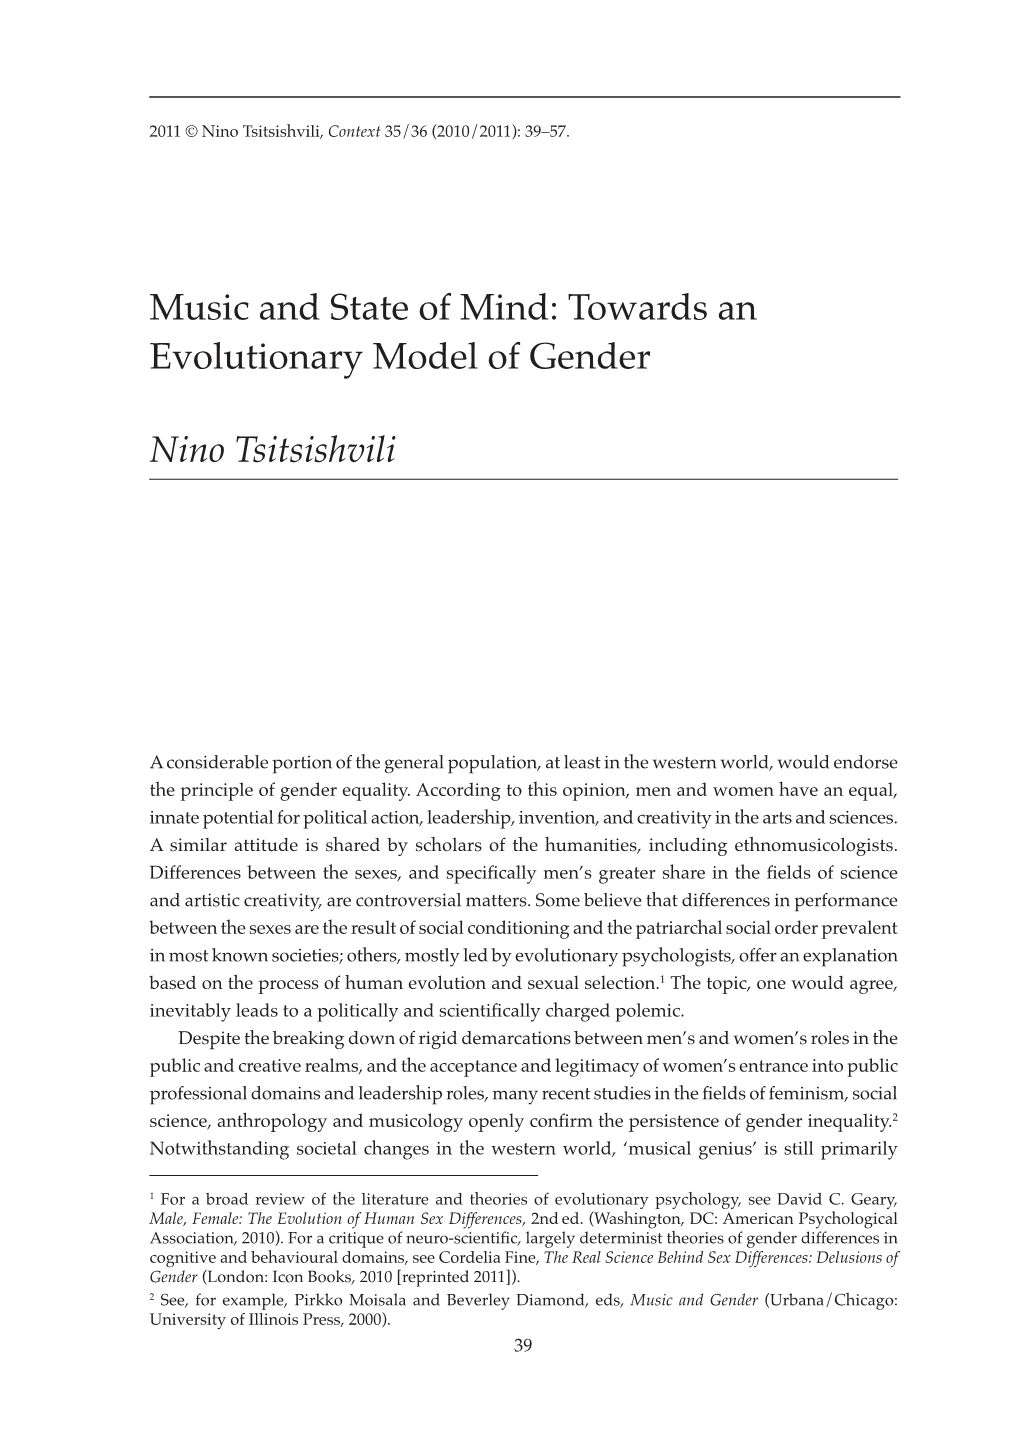 Music and State of Mind: Towards an Evolutionary Model of Gender